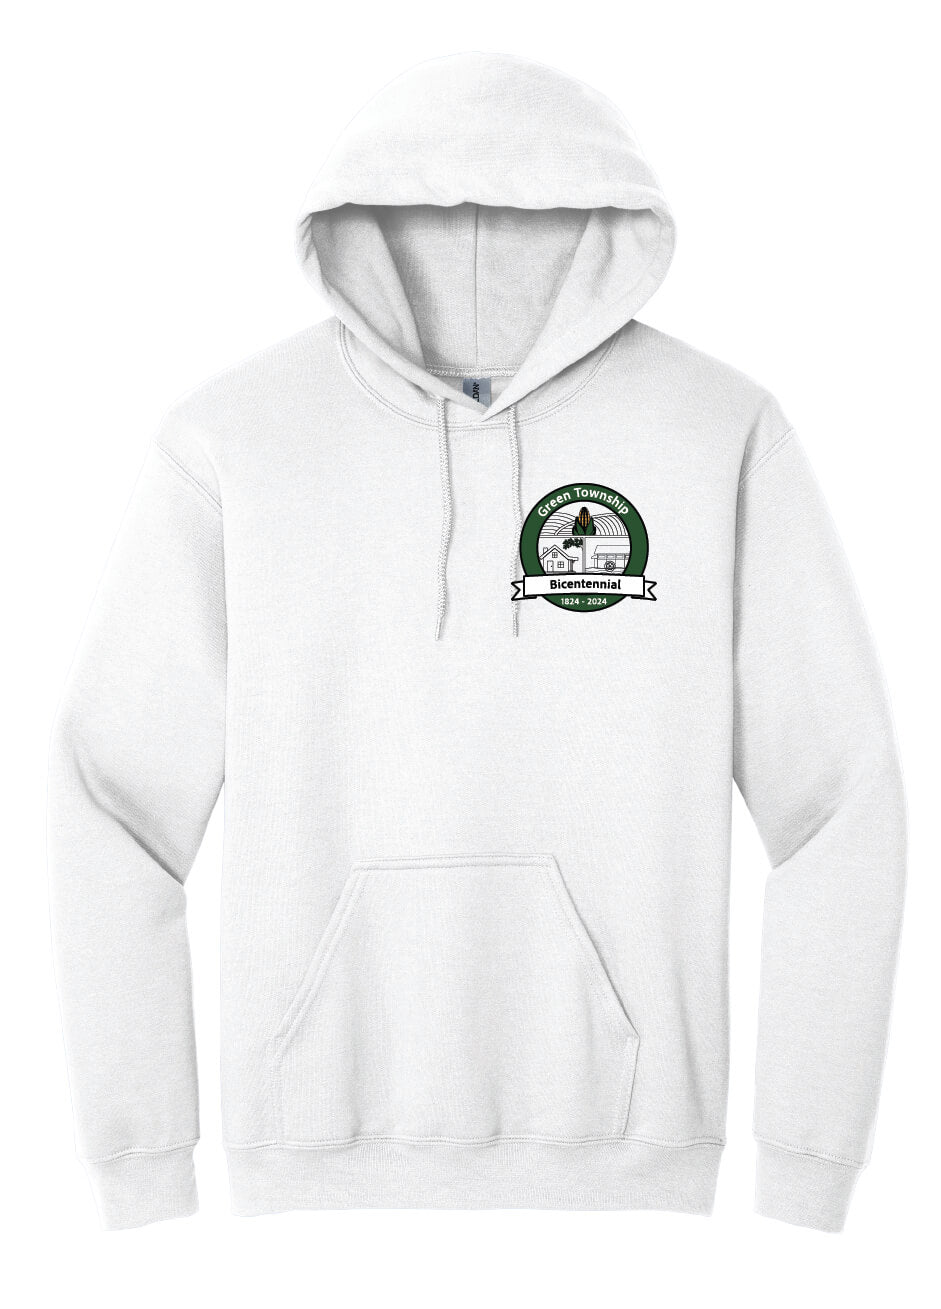 Hoodie (Youth) white